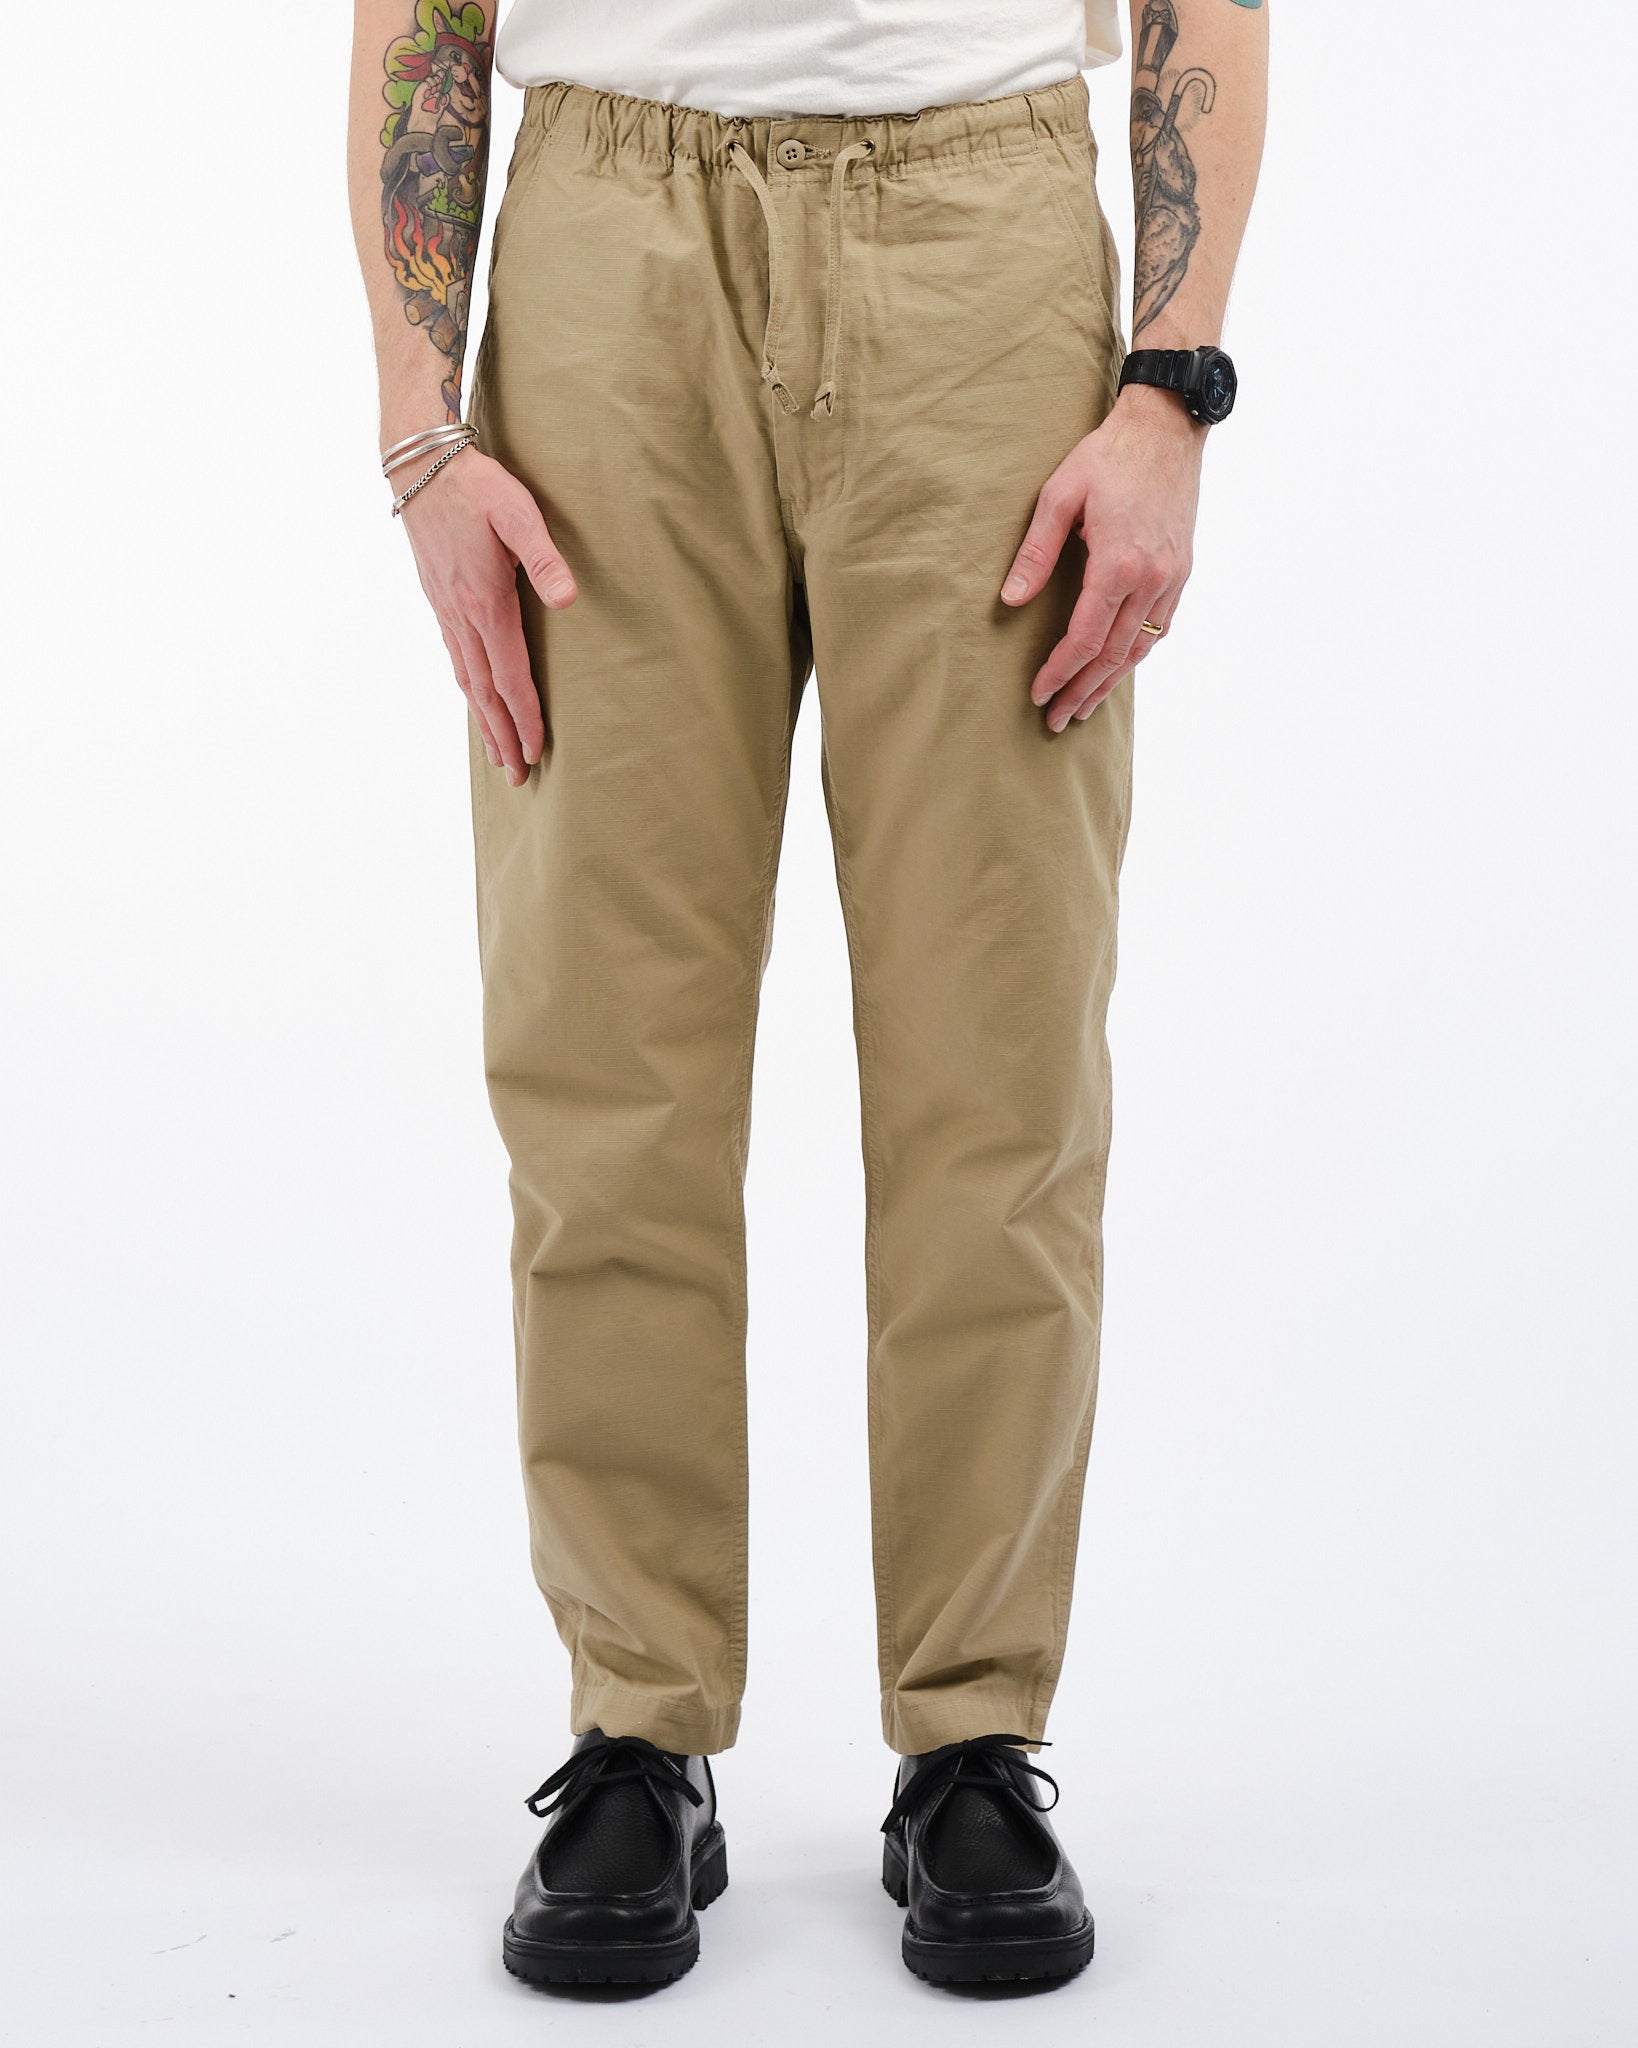 Shop men's pants and trousers online ▶️ Meadow Store